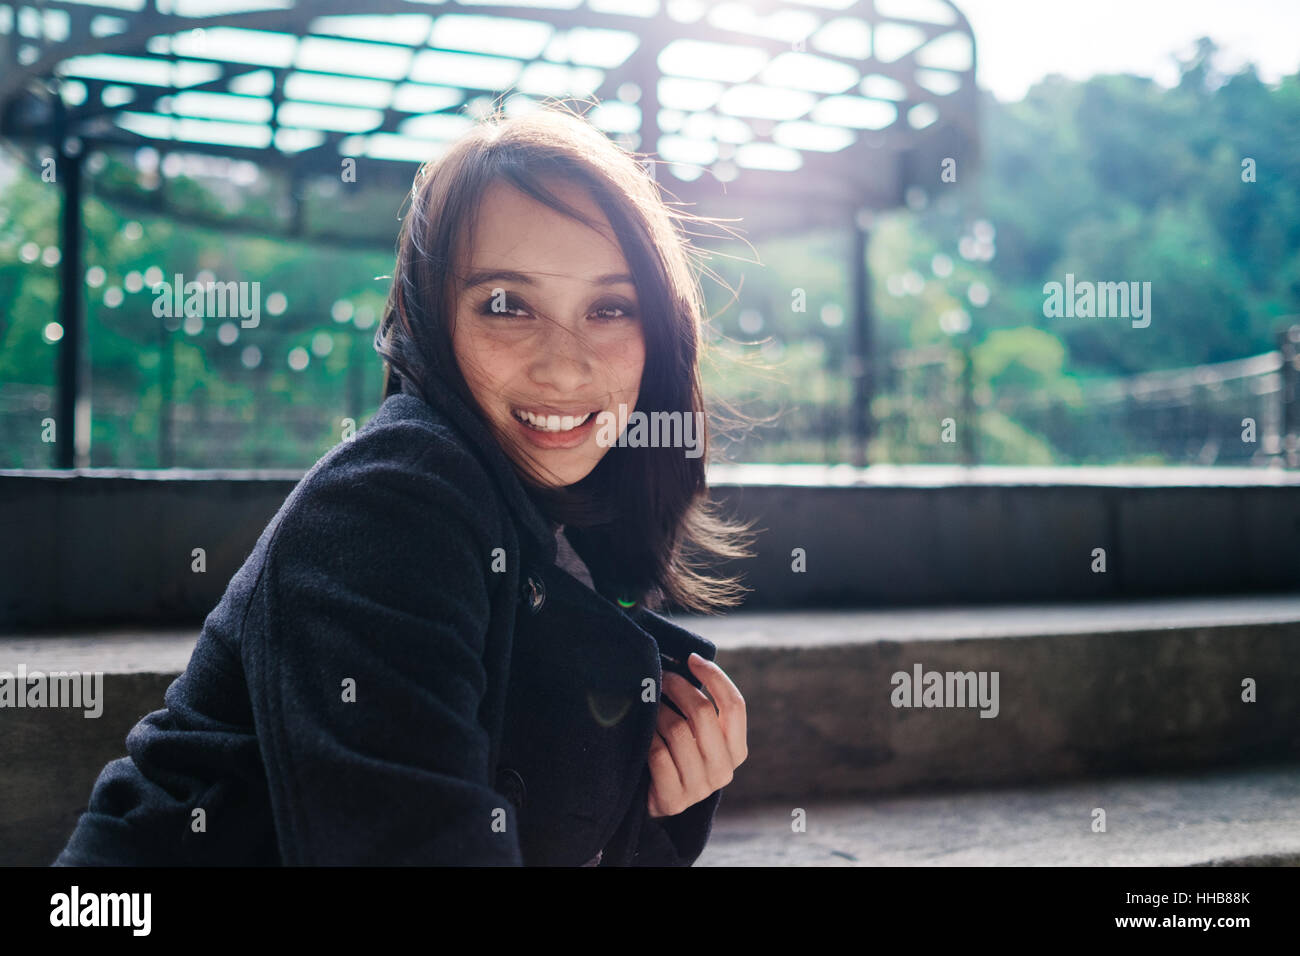 A smiling woman. Stock Photo